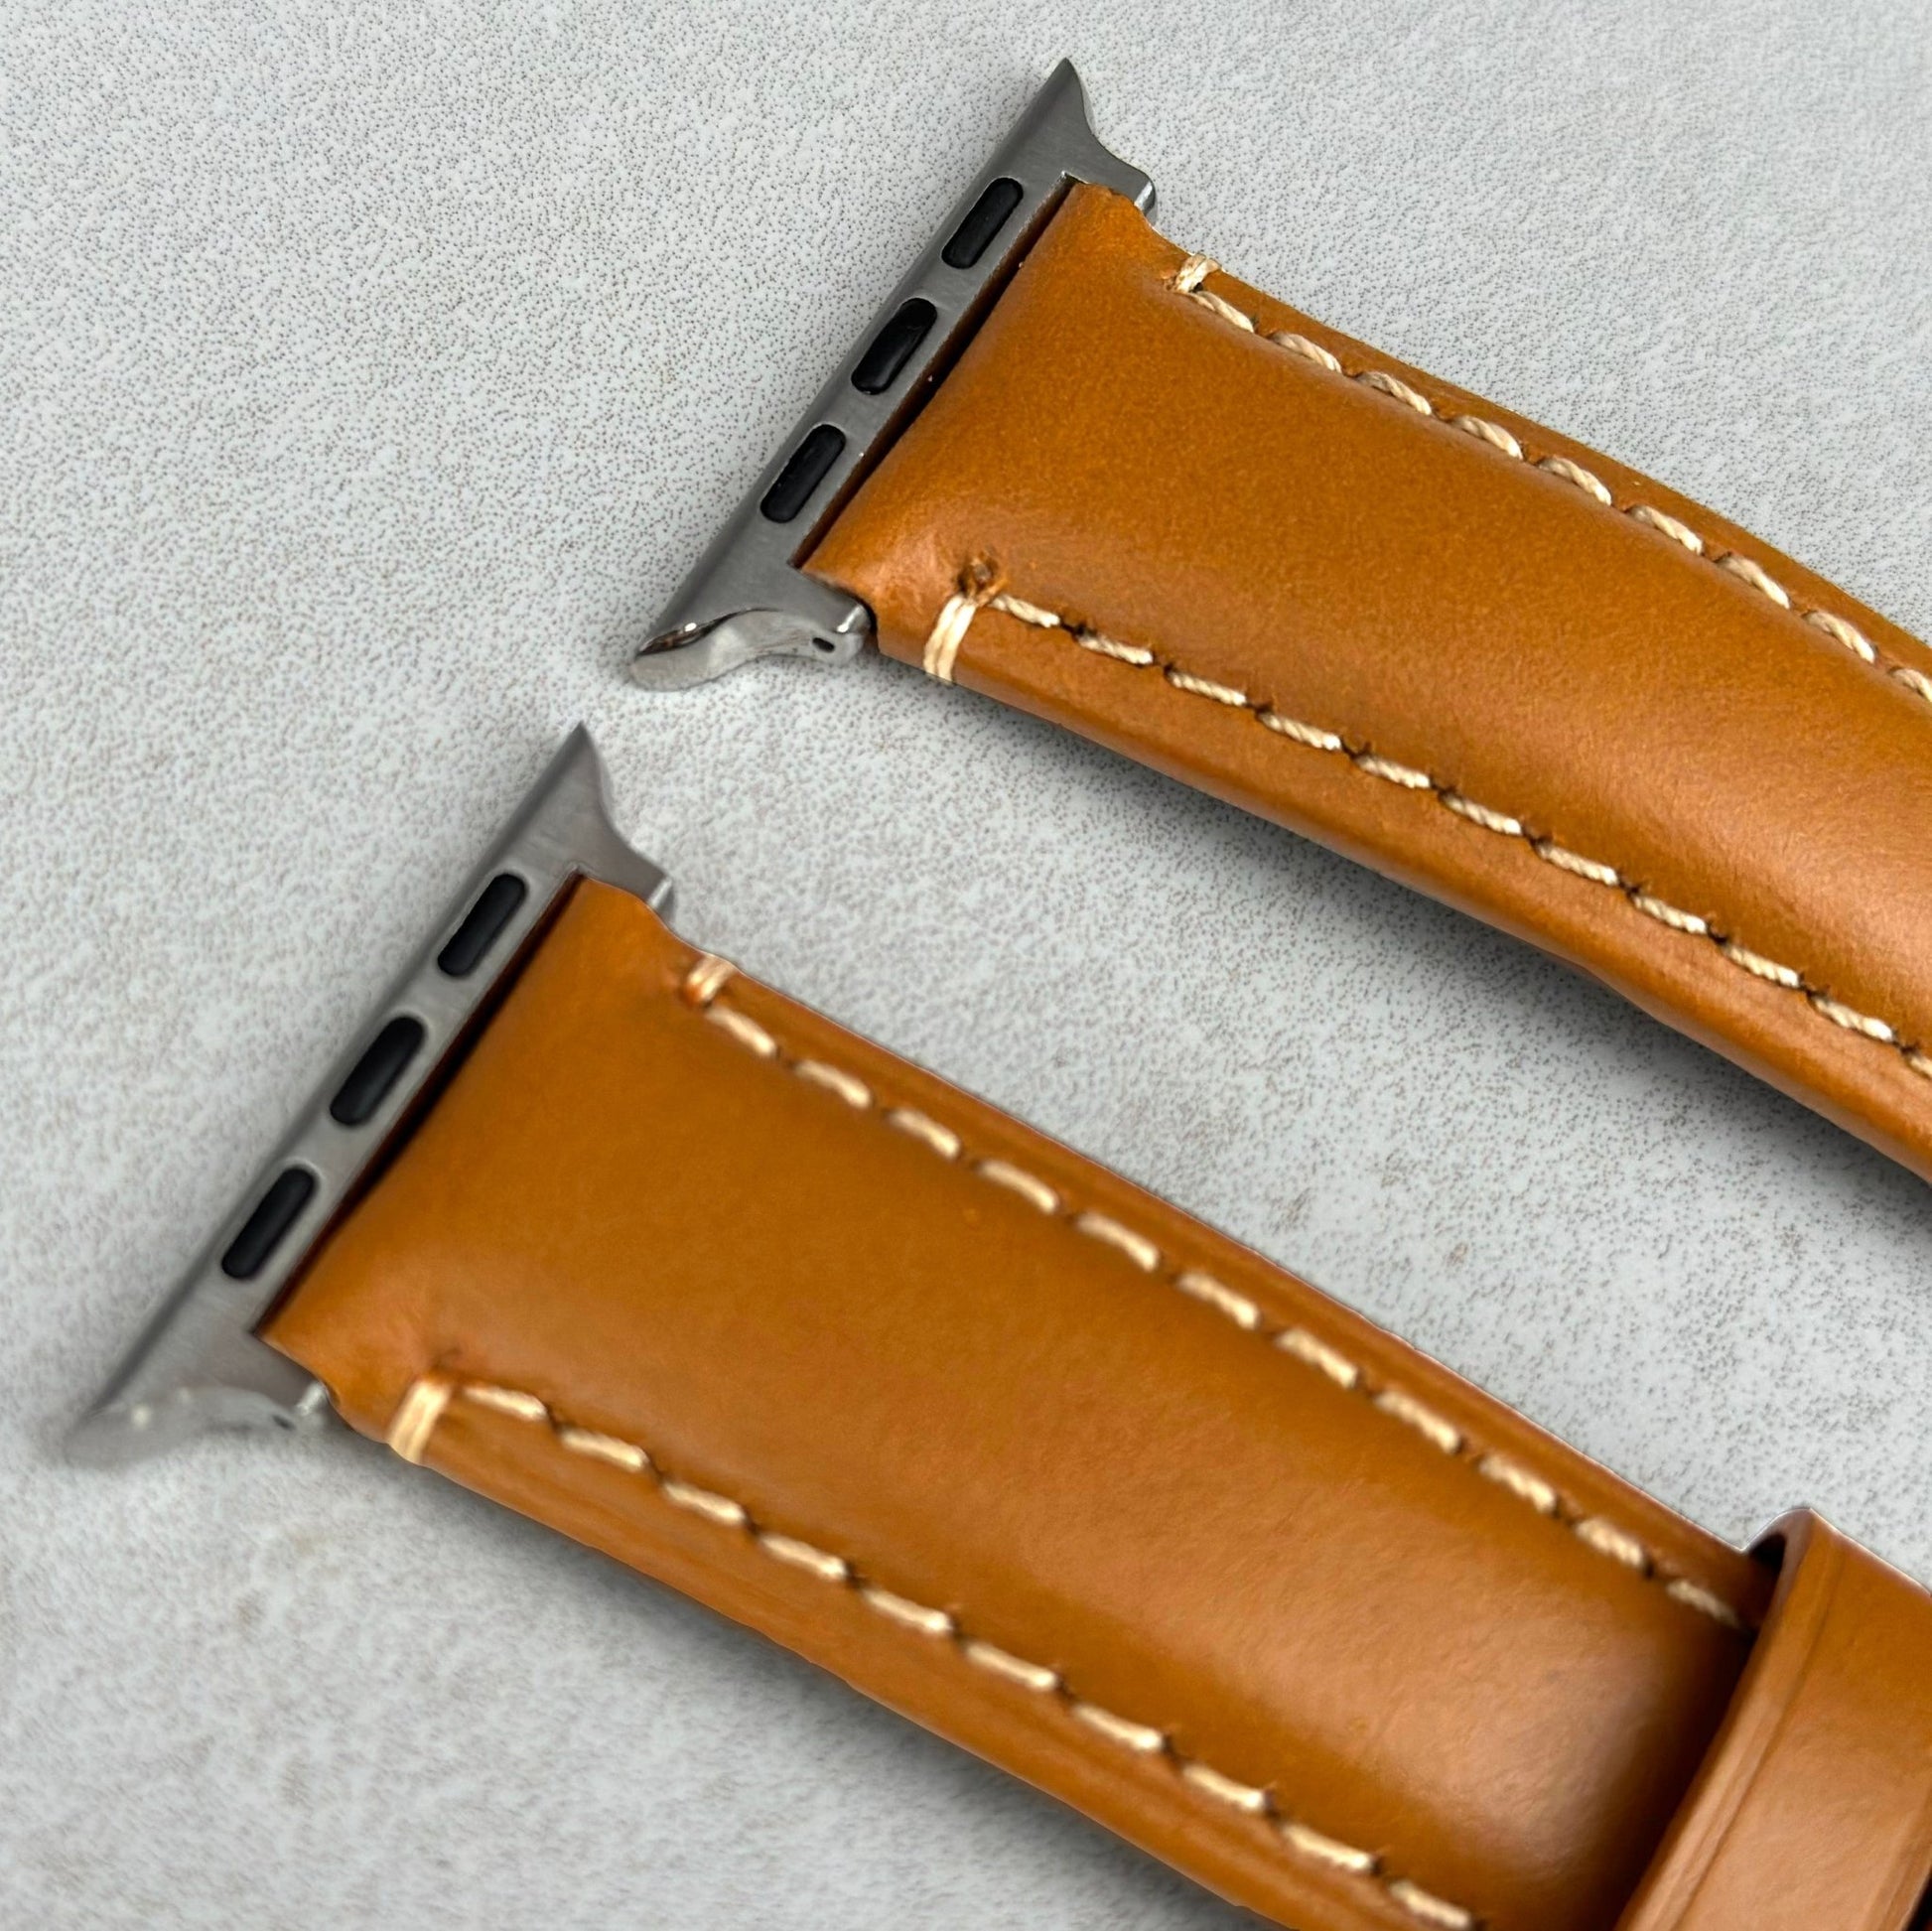 Top of the Oslo tan full grain leather Apple Watch strap. Brushed 316L stainless steel hardware. Watch And Strap